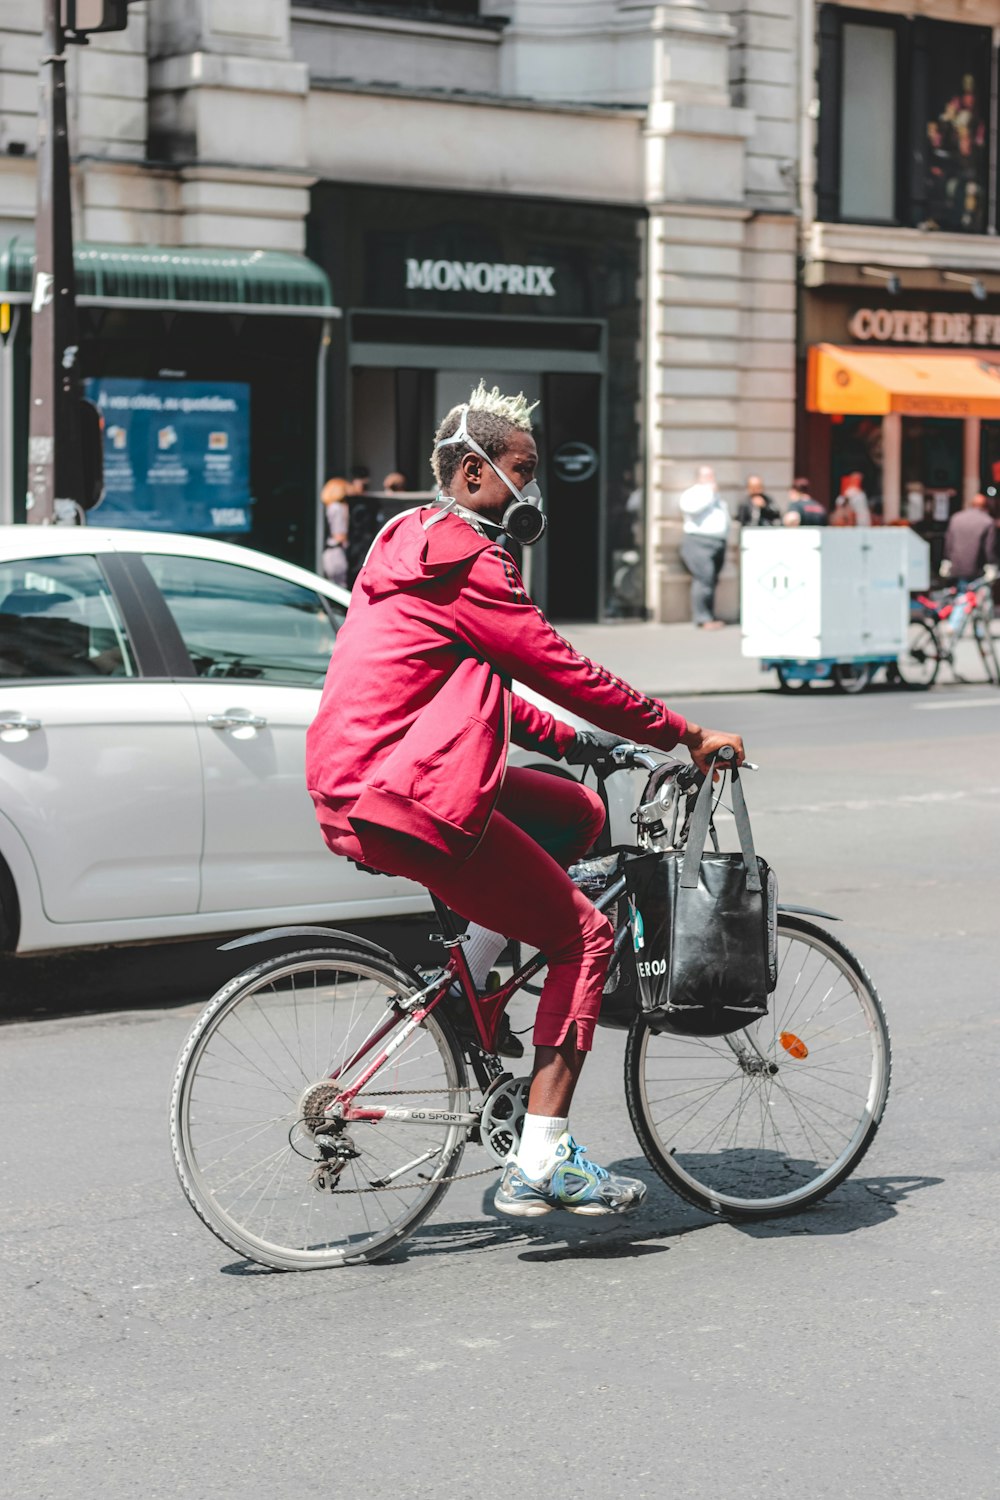 man in red jacket riding on bicycle during daytime